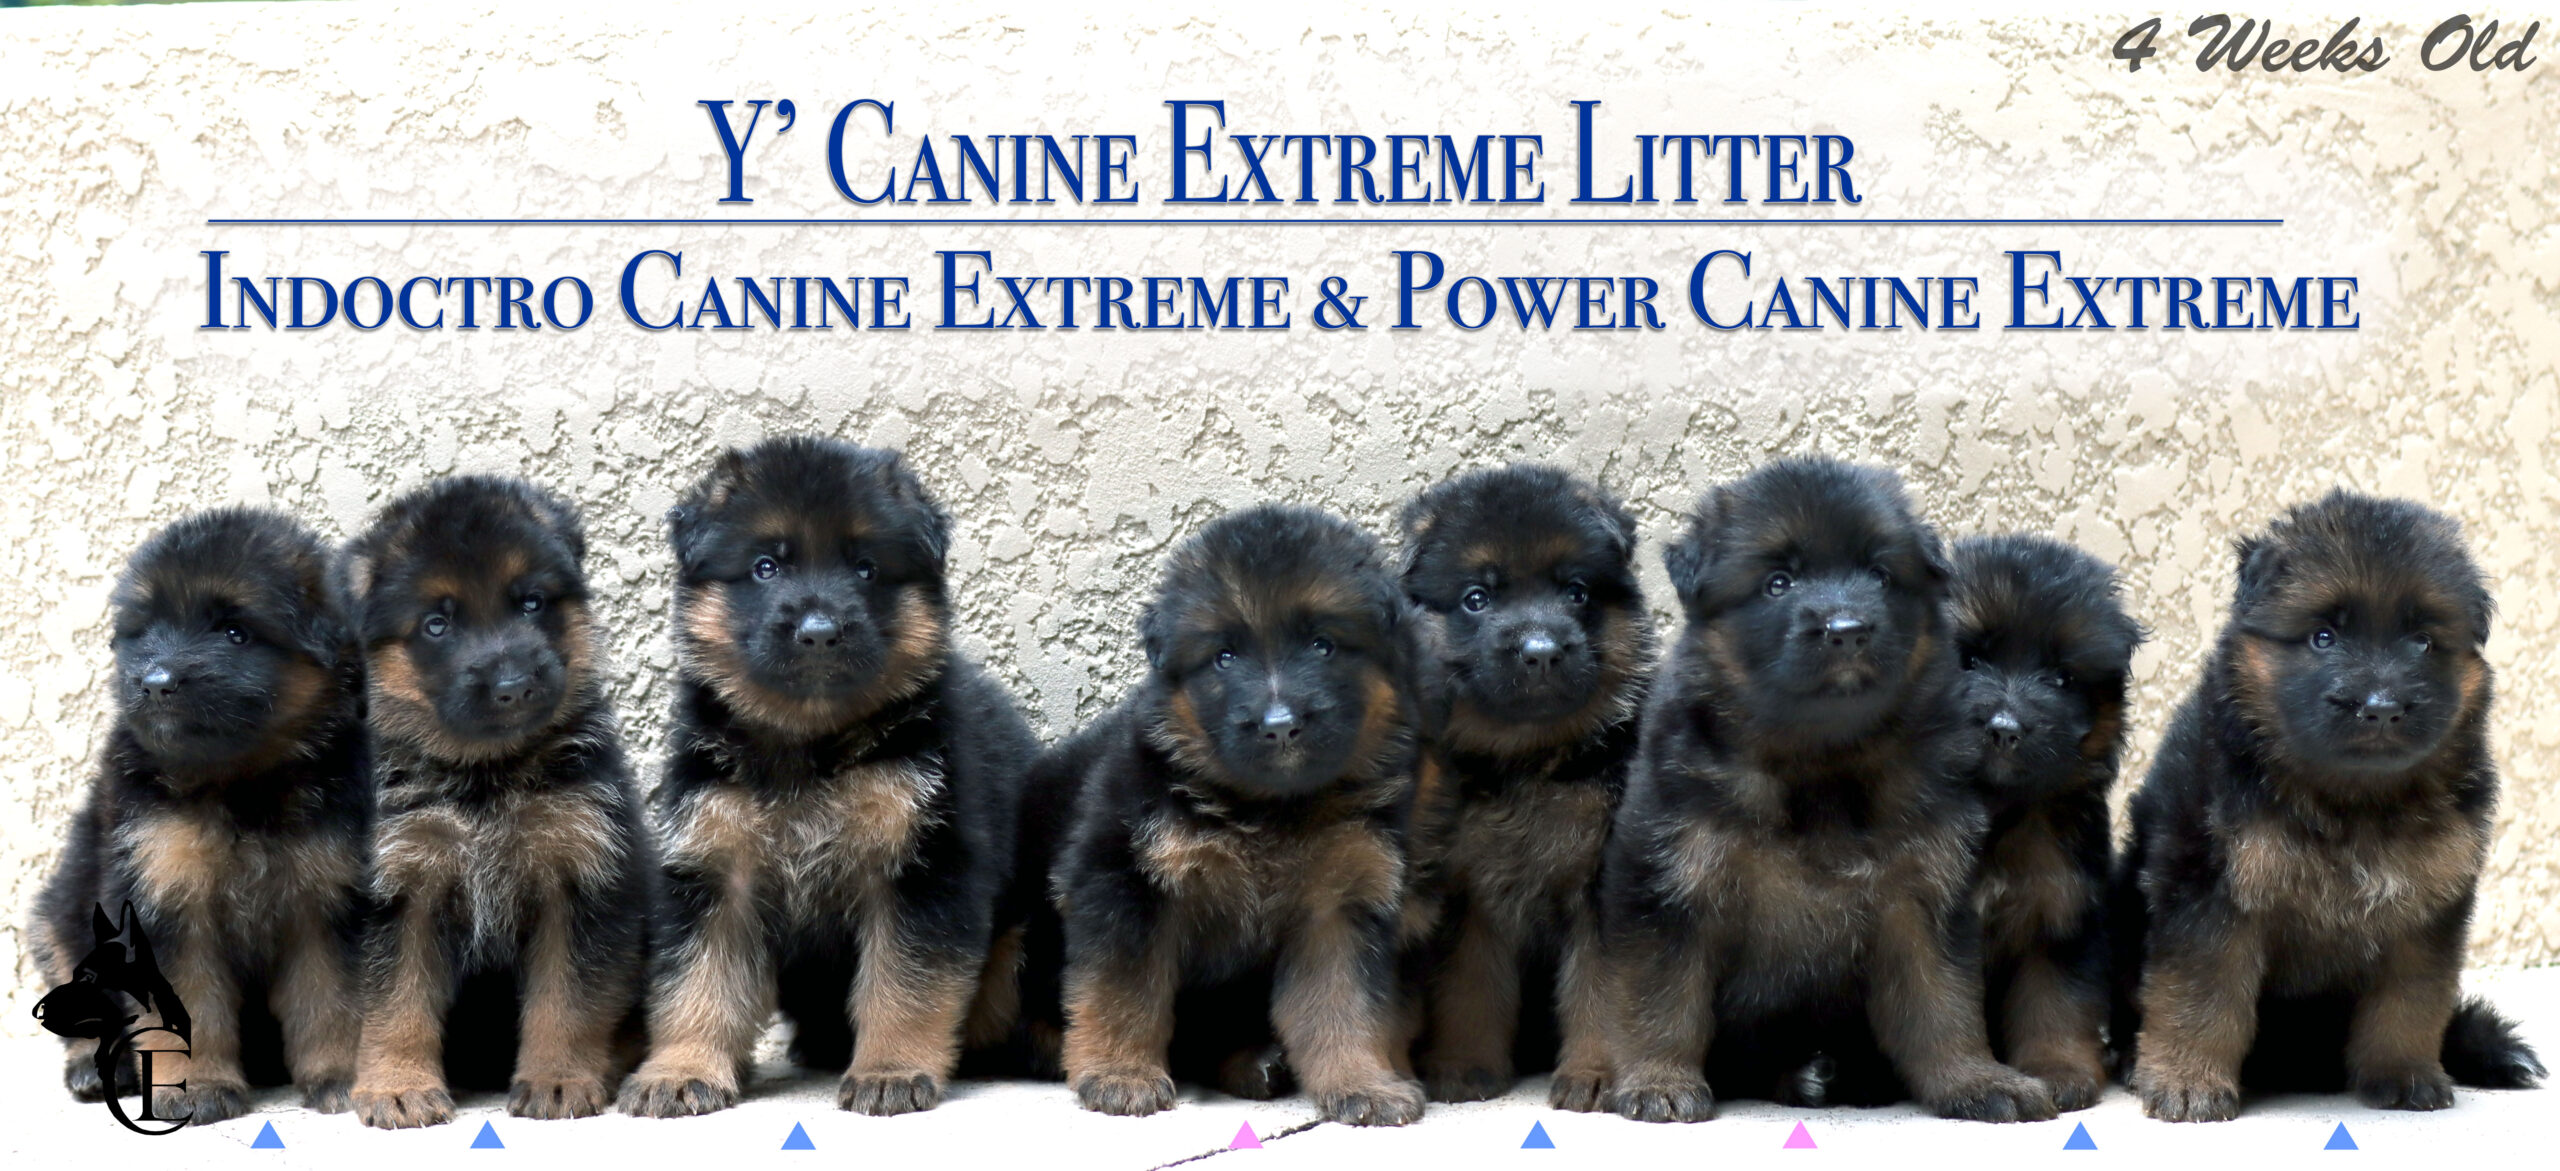 Y’ Canine Extreme Litter